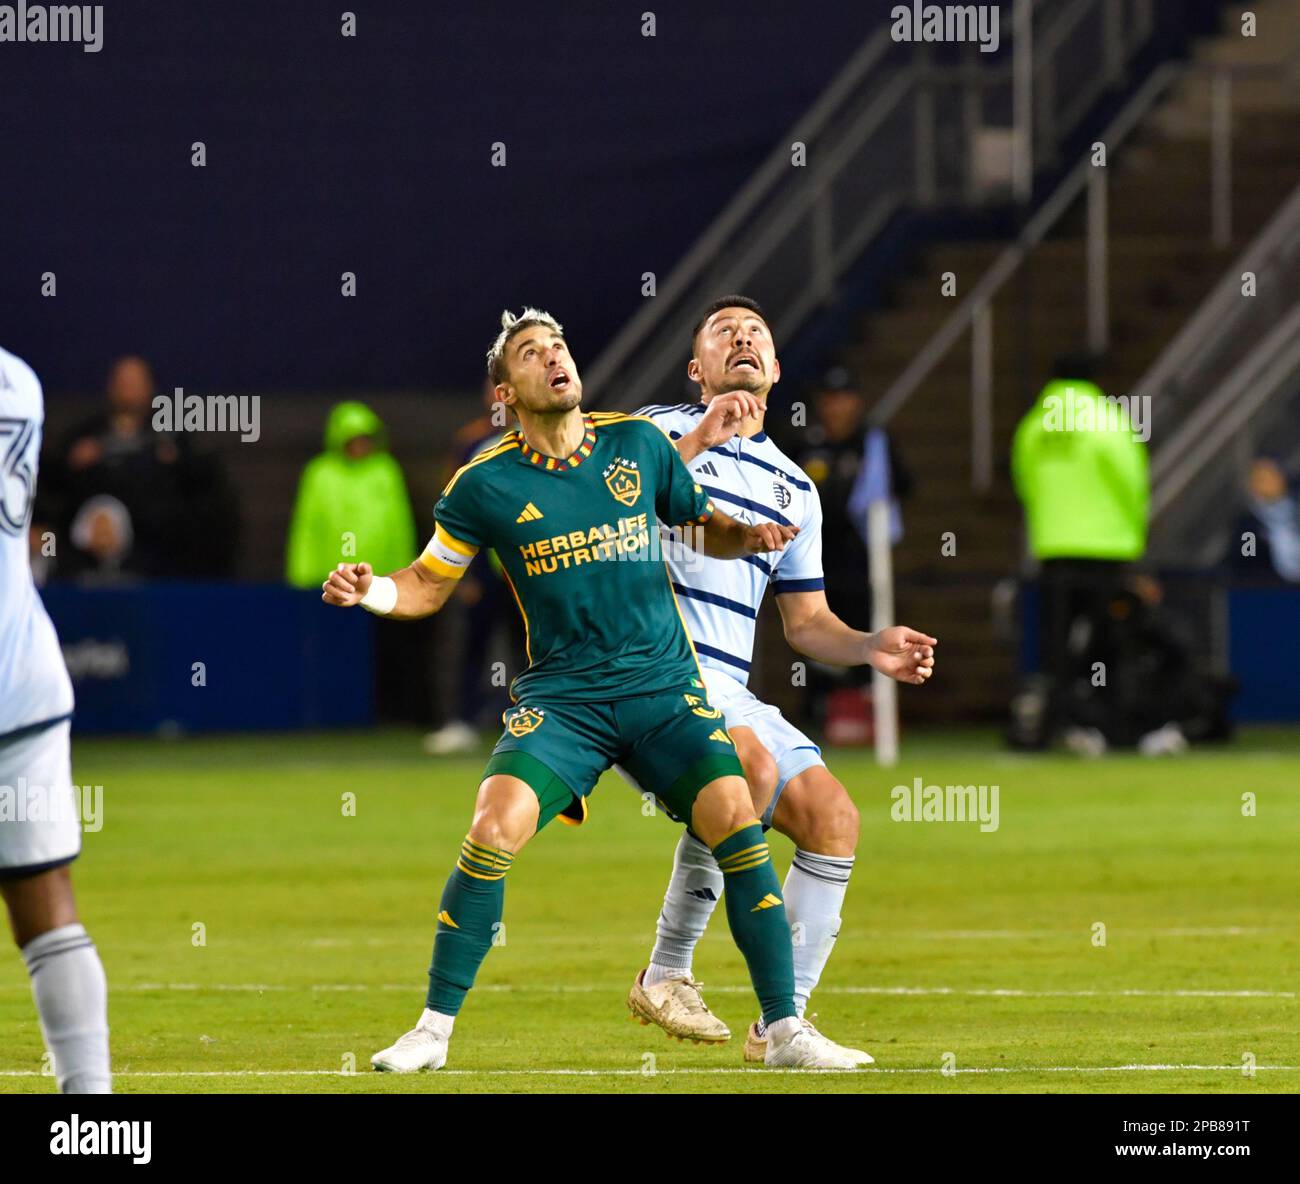 Kansas City, USA. 16th Nov, 2022. Los Angeles Galaxy midfielder Gastón Brugman (5, left) and Sporting Kansas City midfielder Roger Espinoza (15) wait for a ball in the air to drop. Sporting KC hosted the LA Galaxy in a Major League Soccer game on March 11, 2023 at Children's Mercy Park Stadium in Kansas City, KS, USA. Photo by Tim Vizer/Sipa USA Credit: Sipa USA/Alamy Live News Stock Photo